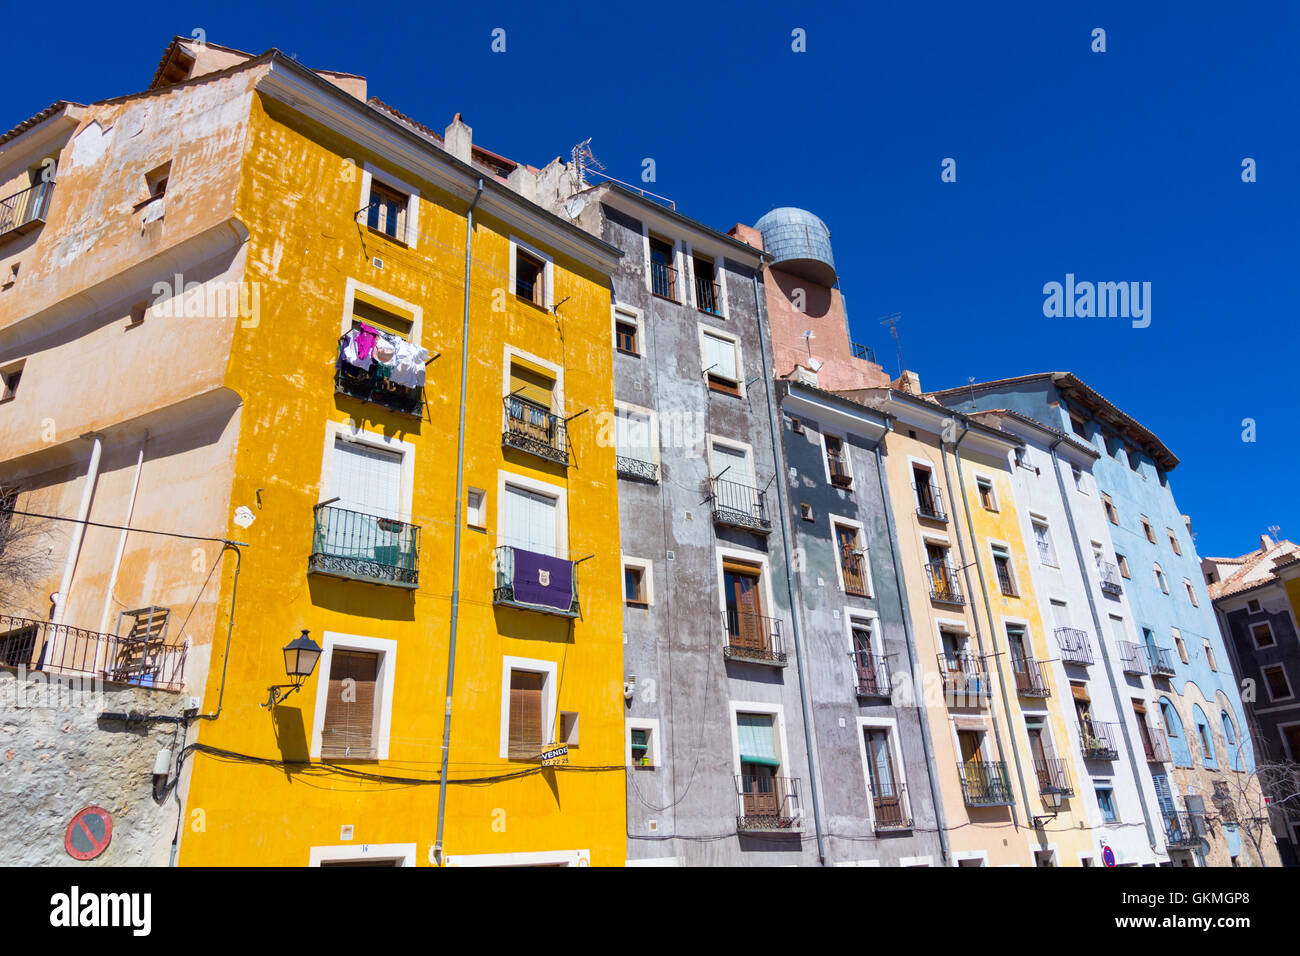 Typical streets and buildings of the famous city of Cuenca, Spain Stock Photo